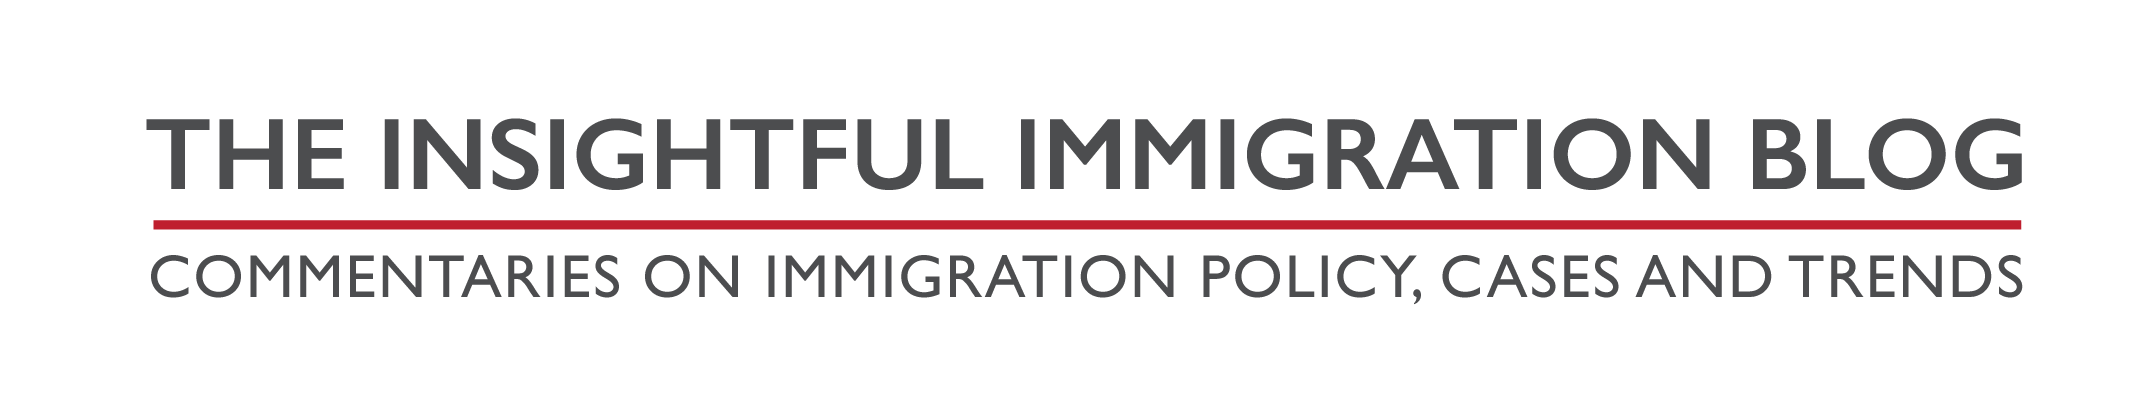 The Insightful Immigration Blog